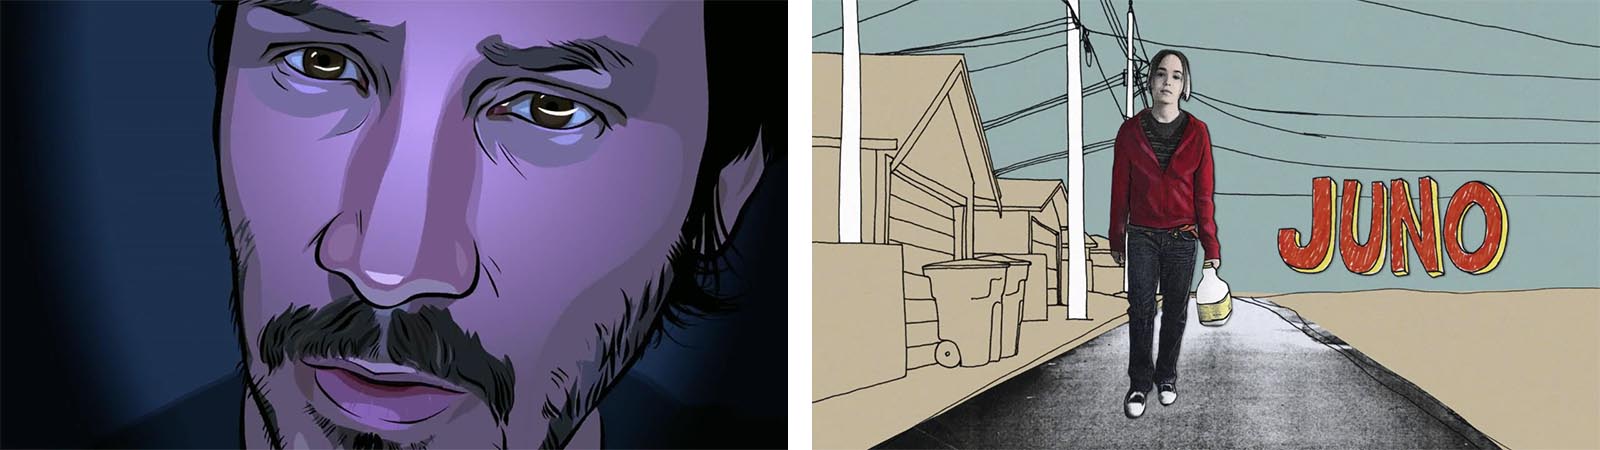 A Scanner Darkly and Juno